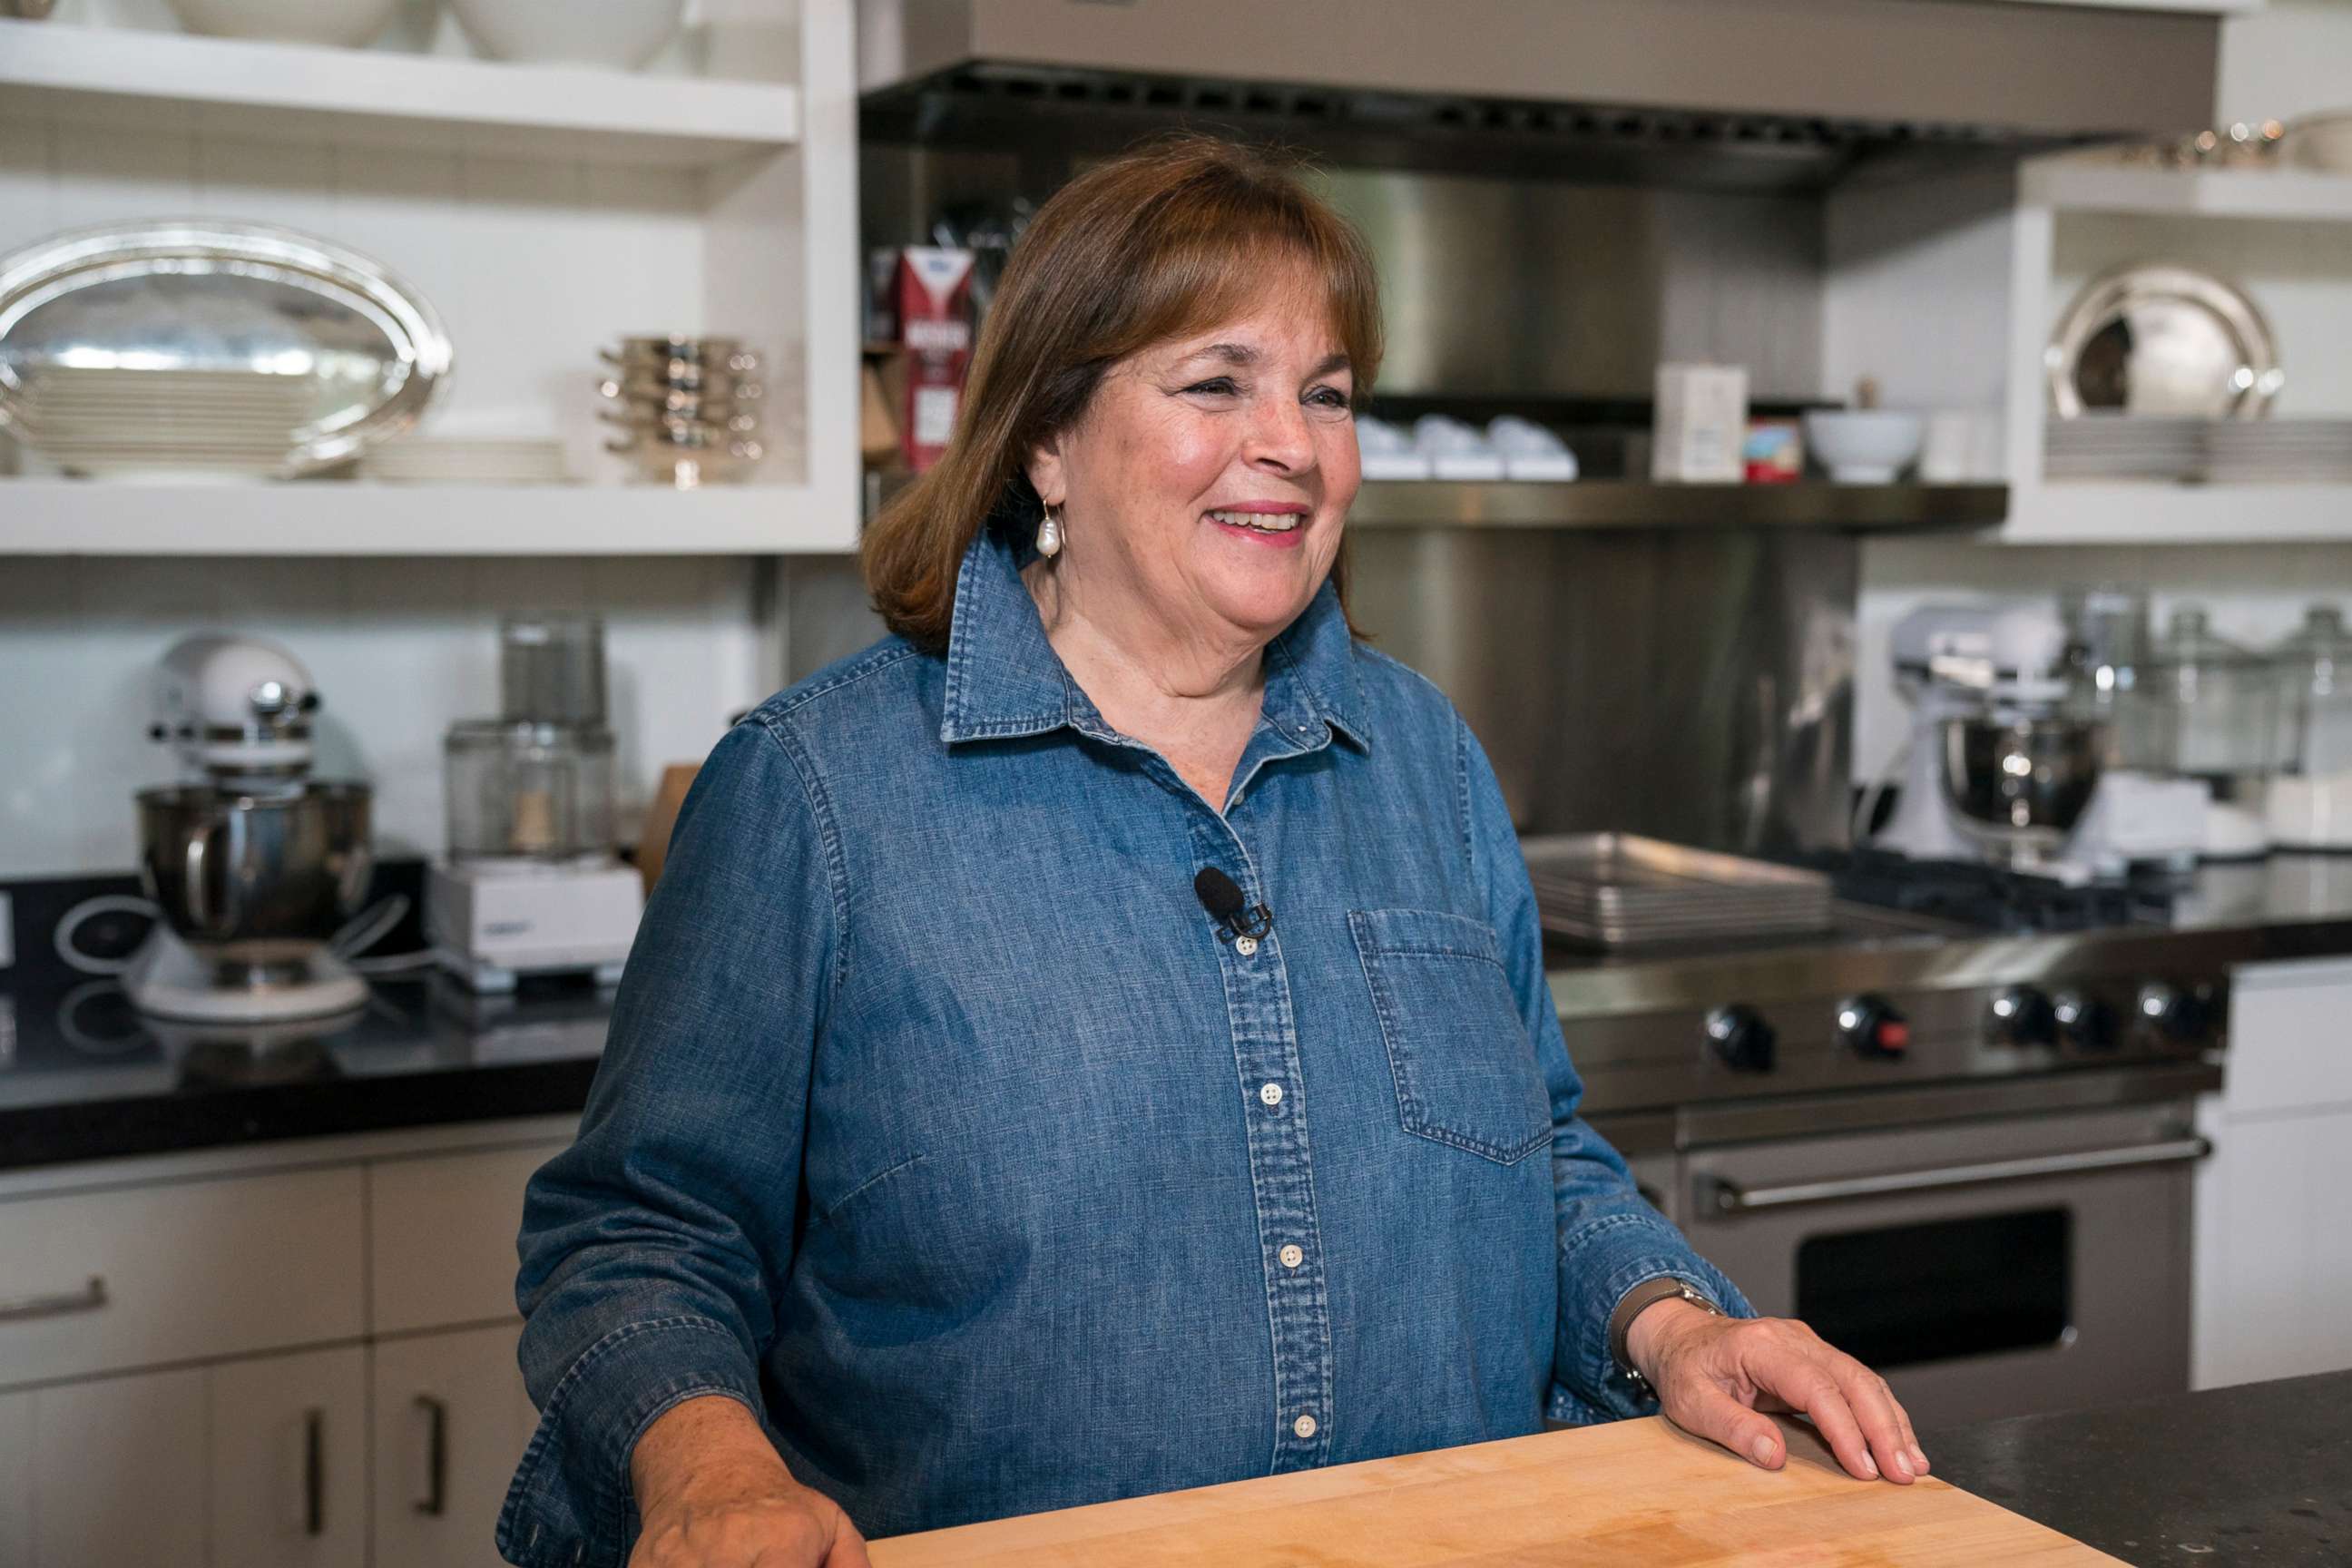 PHOTO: In this Oct. 10, 2018, file photo, Ina Garten is shown in New York.